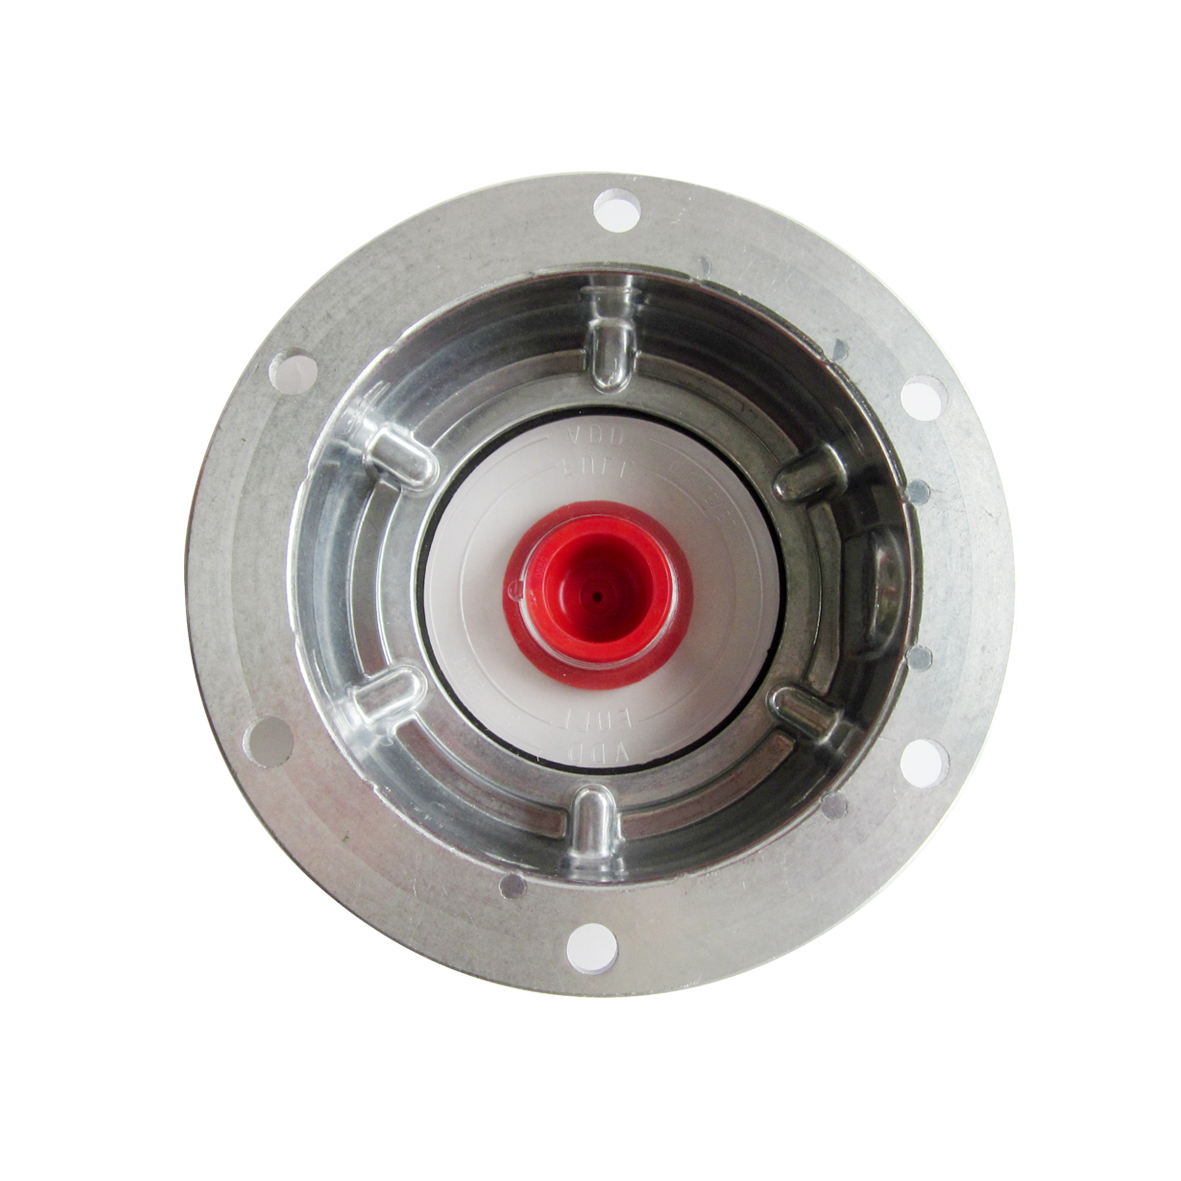 Hub cap for trailer and truck use